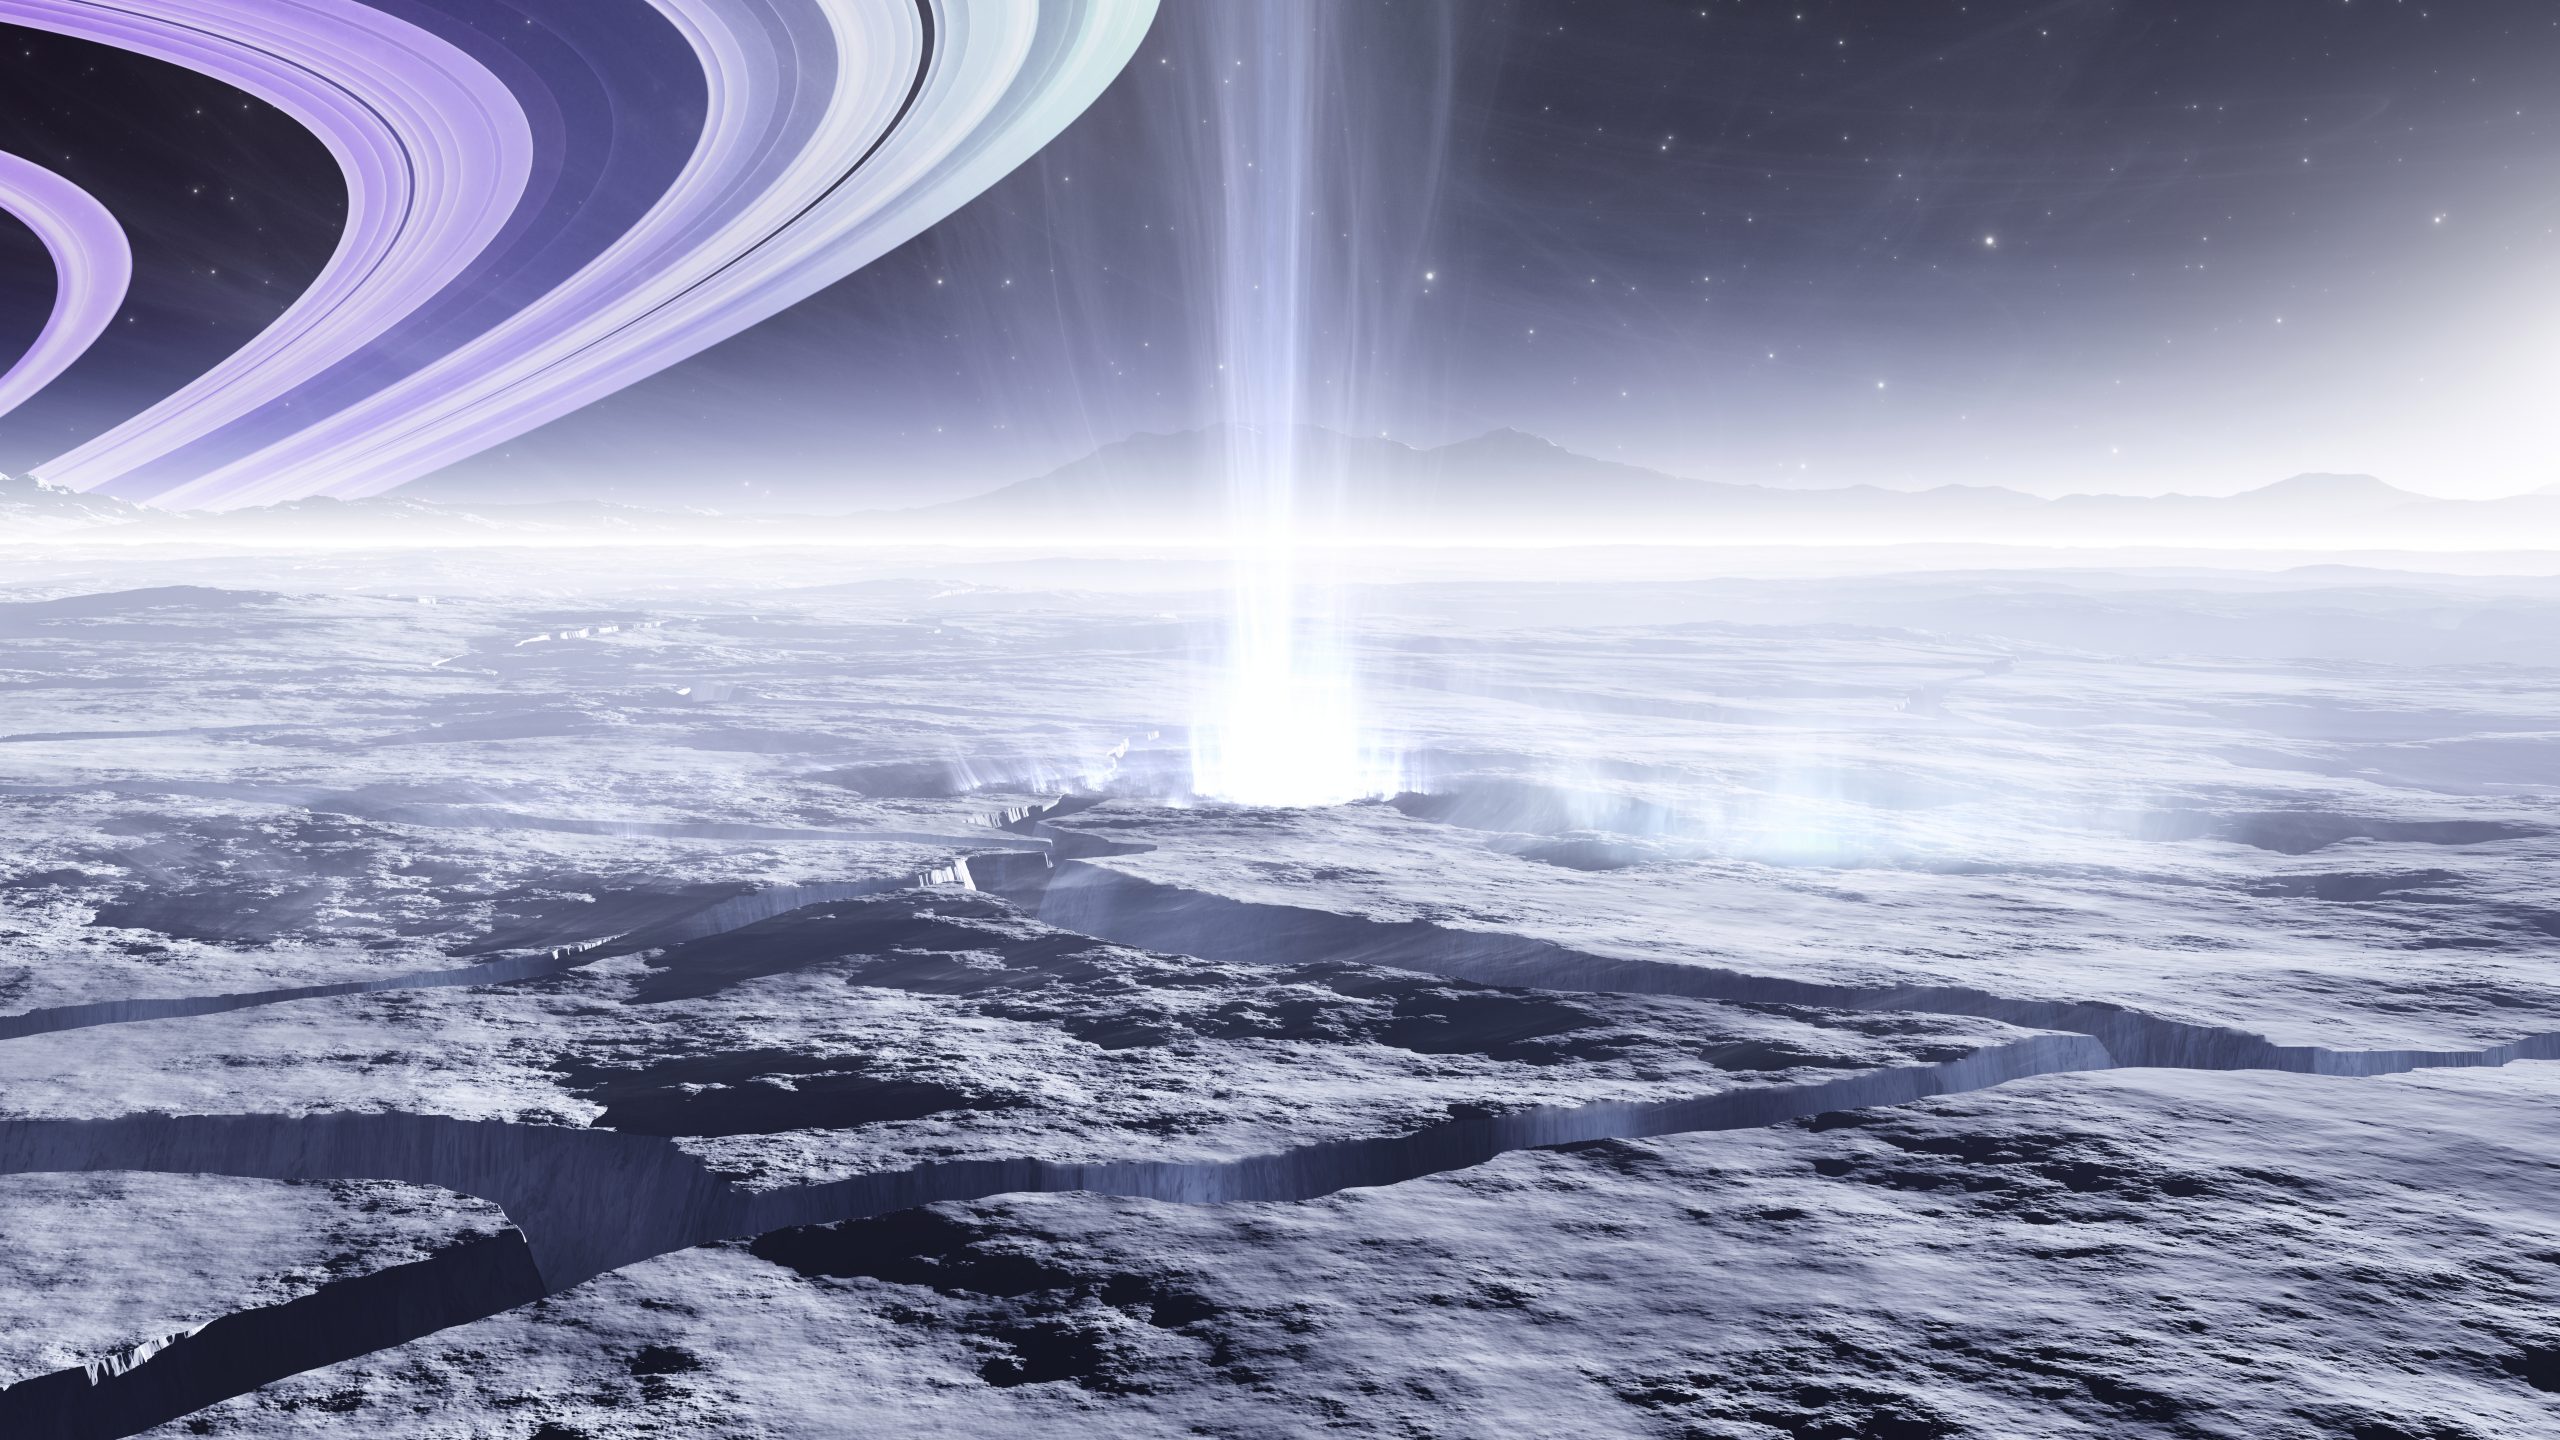 An artist's illustration of a view from the surface of Enceladus and Saturn's rings. Depositphotos.